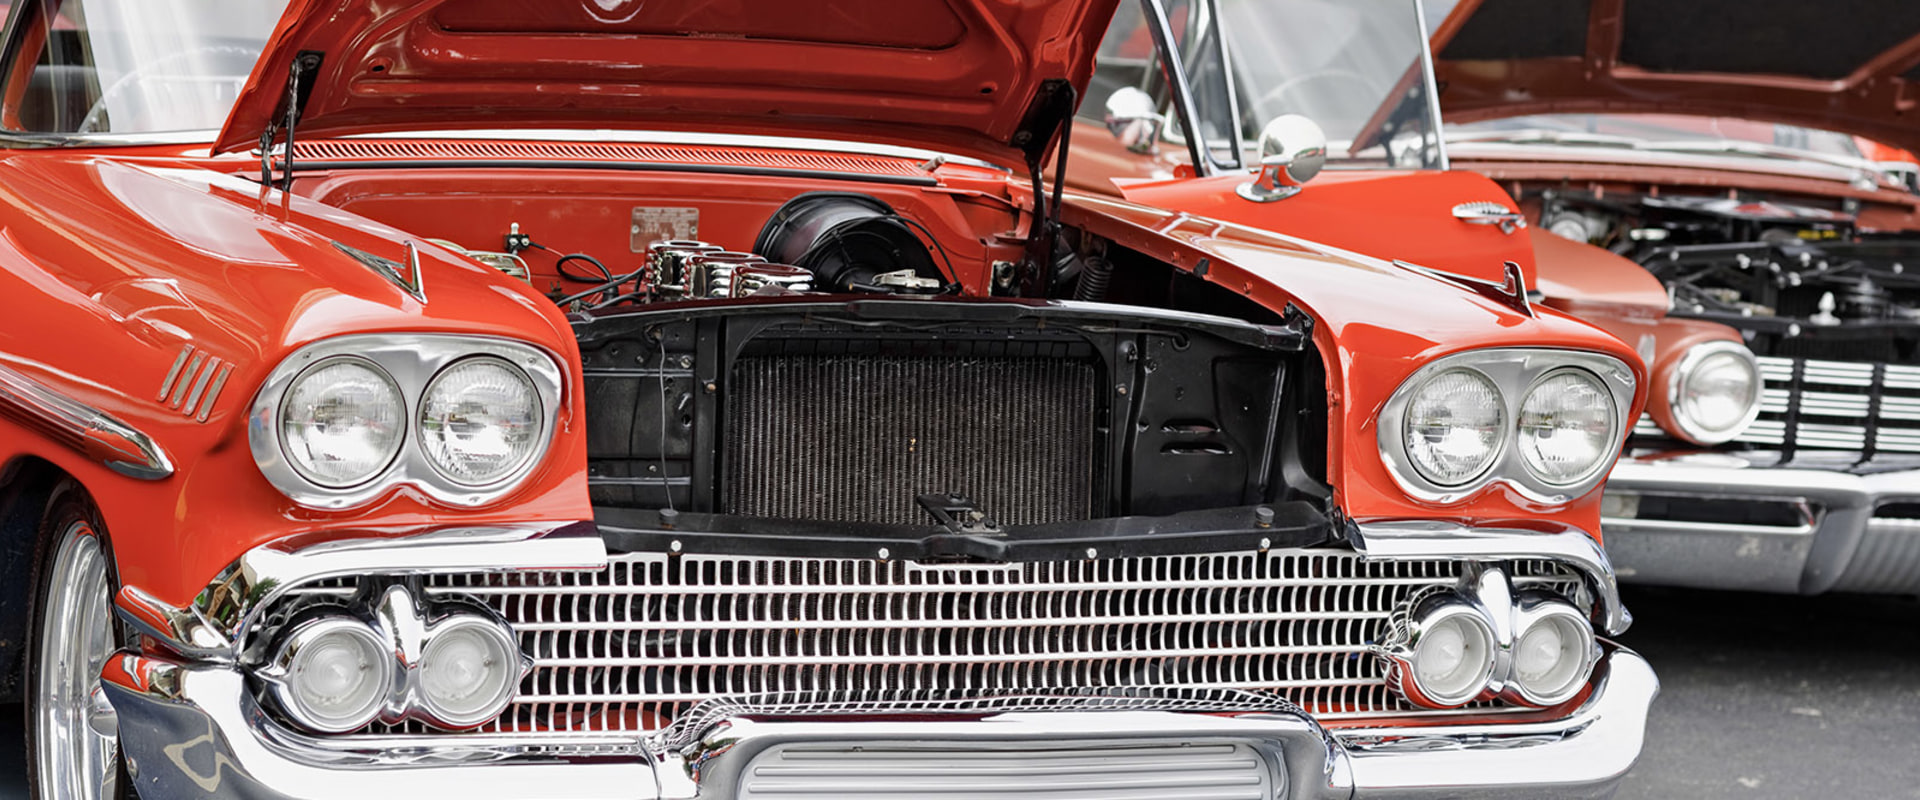 Modifying Vintage Cars in Central Texas: An Expert's Guide